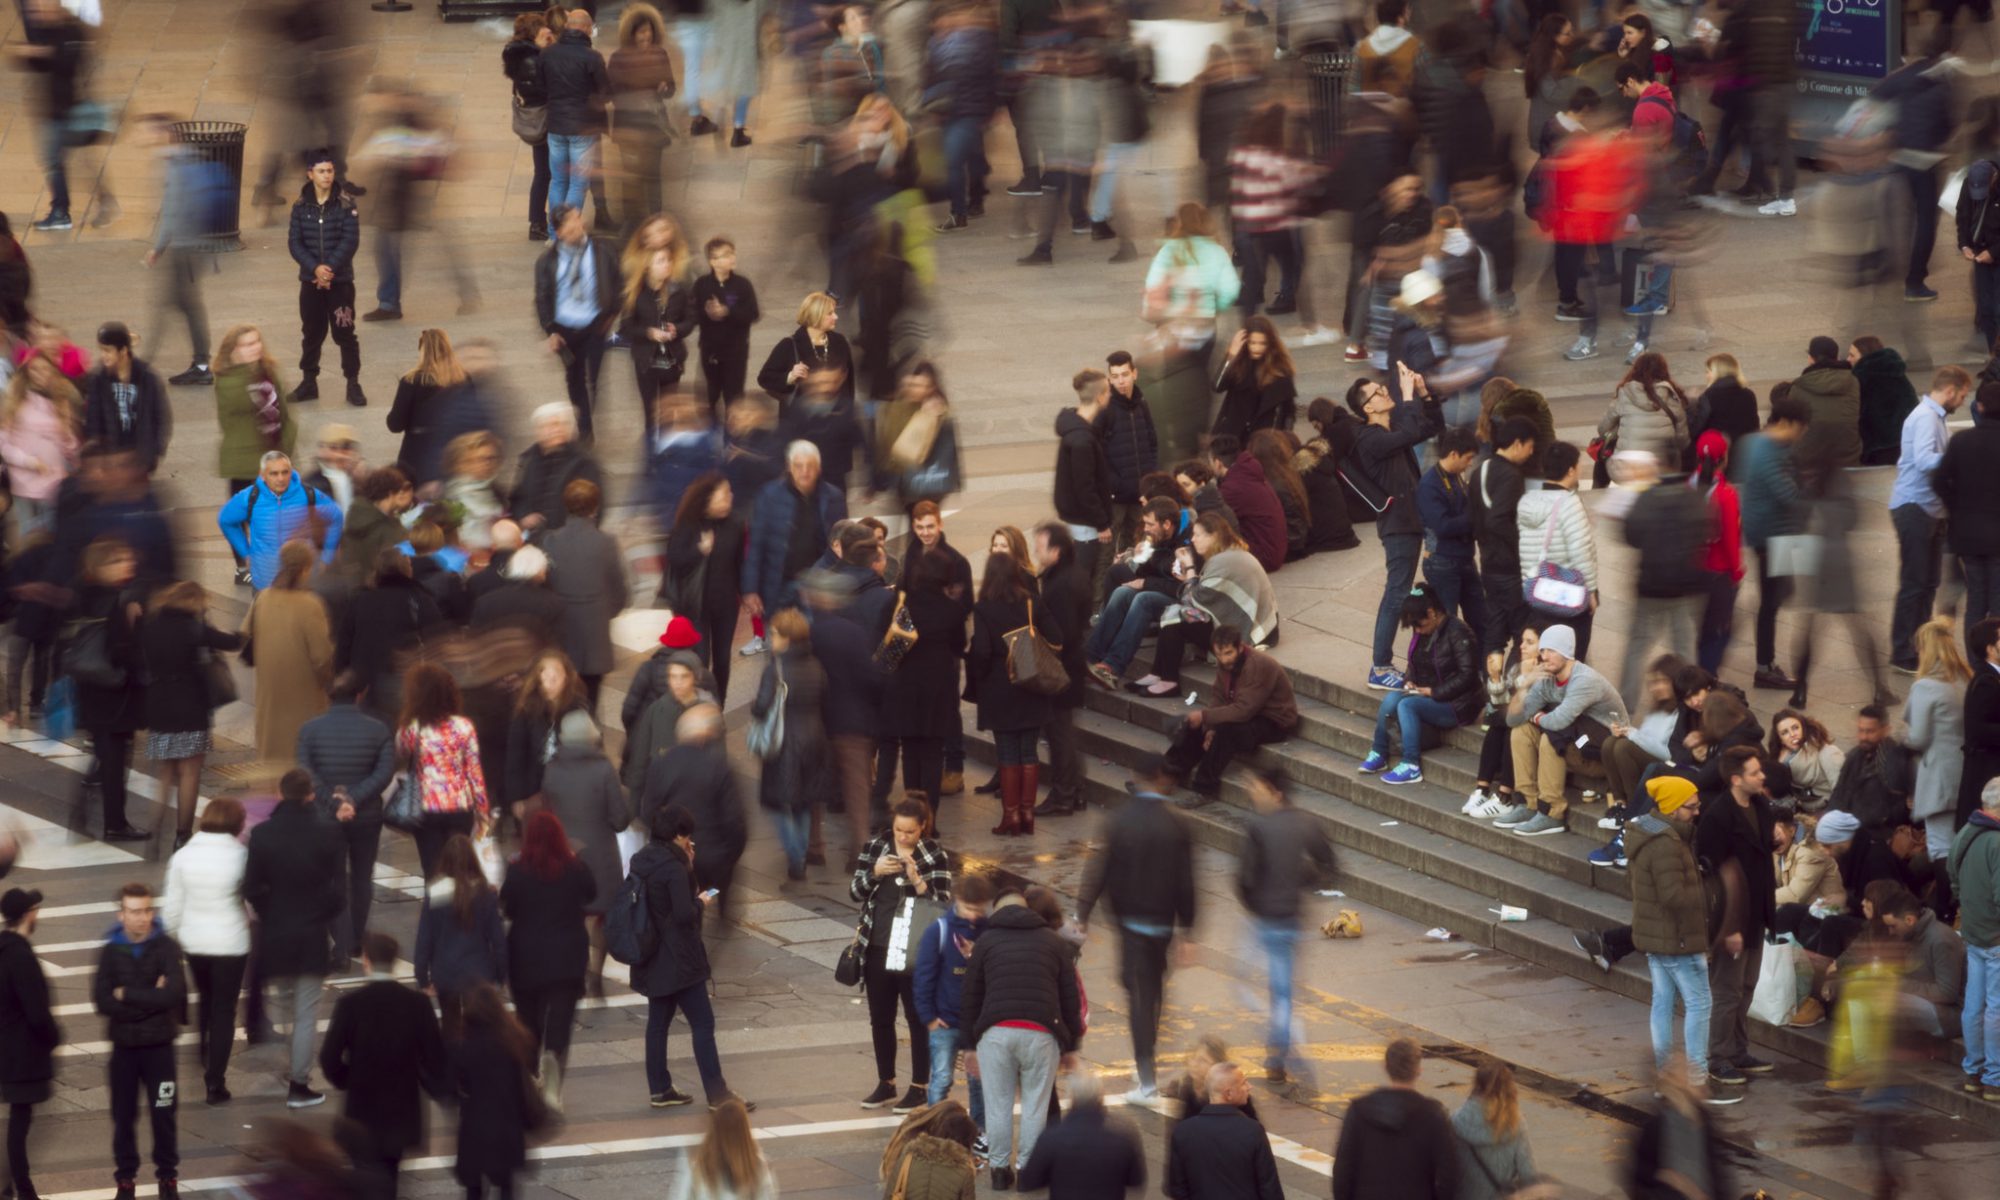 Birds-eye view of a crowd of people. Some people are in focus and others are blurred.